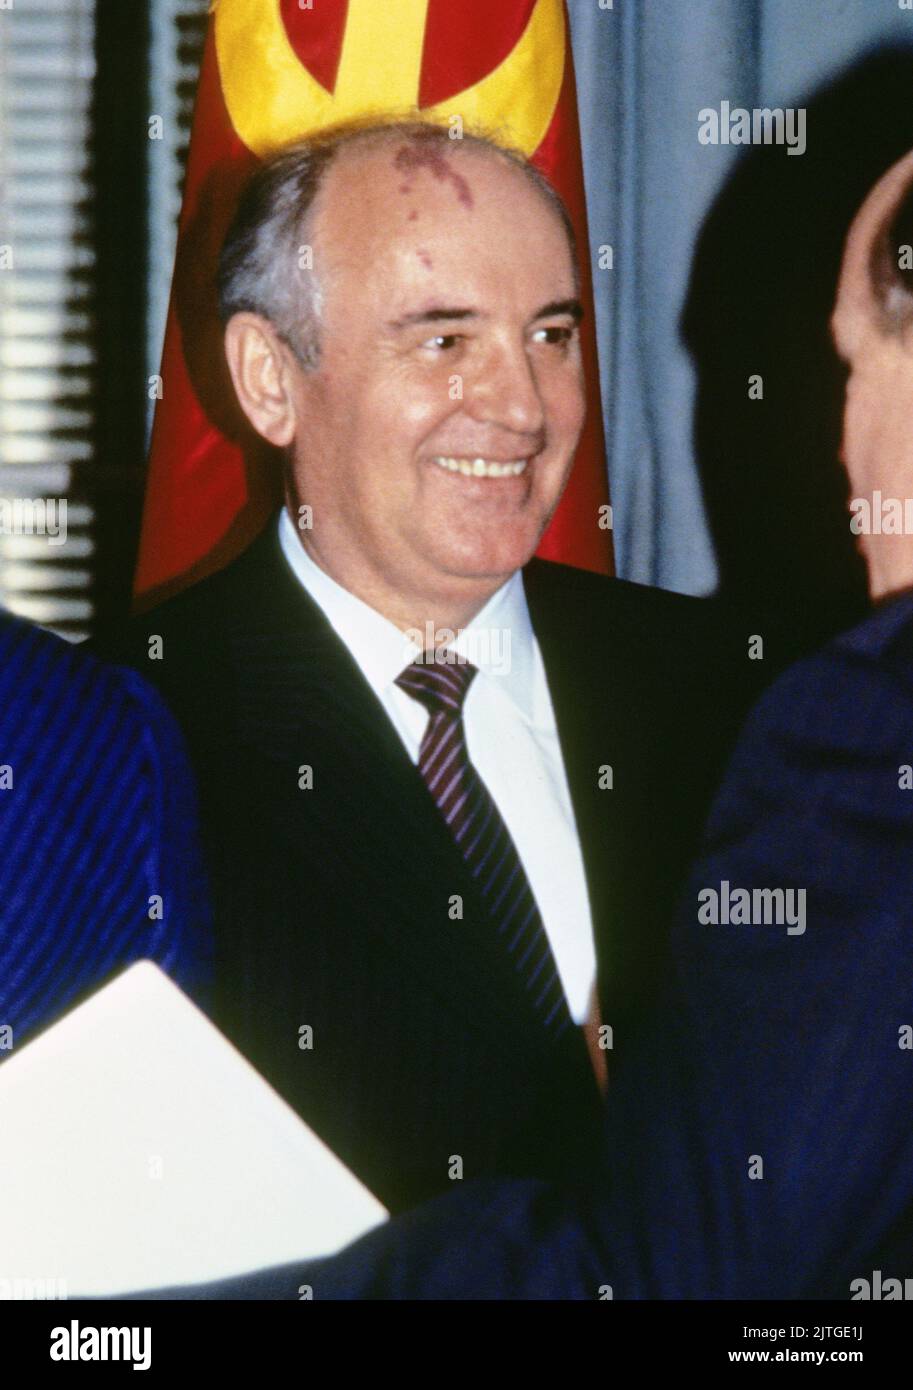 **FILE PHOTO** Mikhail Gorbachev Has Passed Away. President Mikhail Gorbachev of the Soviet Union greets guests at the United States Department of State in Washington, DC prior to meeting US President Ronald Reagan to sign the the Intermediate-Range Nuclear Forces (INF) treaty on December 8, 1987. The agreement eliminated US and Soviet intermediate-and shorter-range nuclear missles and led to the elimination of more nuclear weapons. Credit: Ron Sachs/CNP /MediaPunch Stock Photo